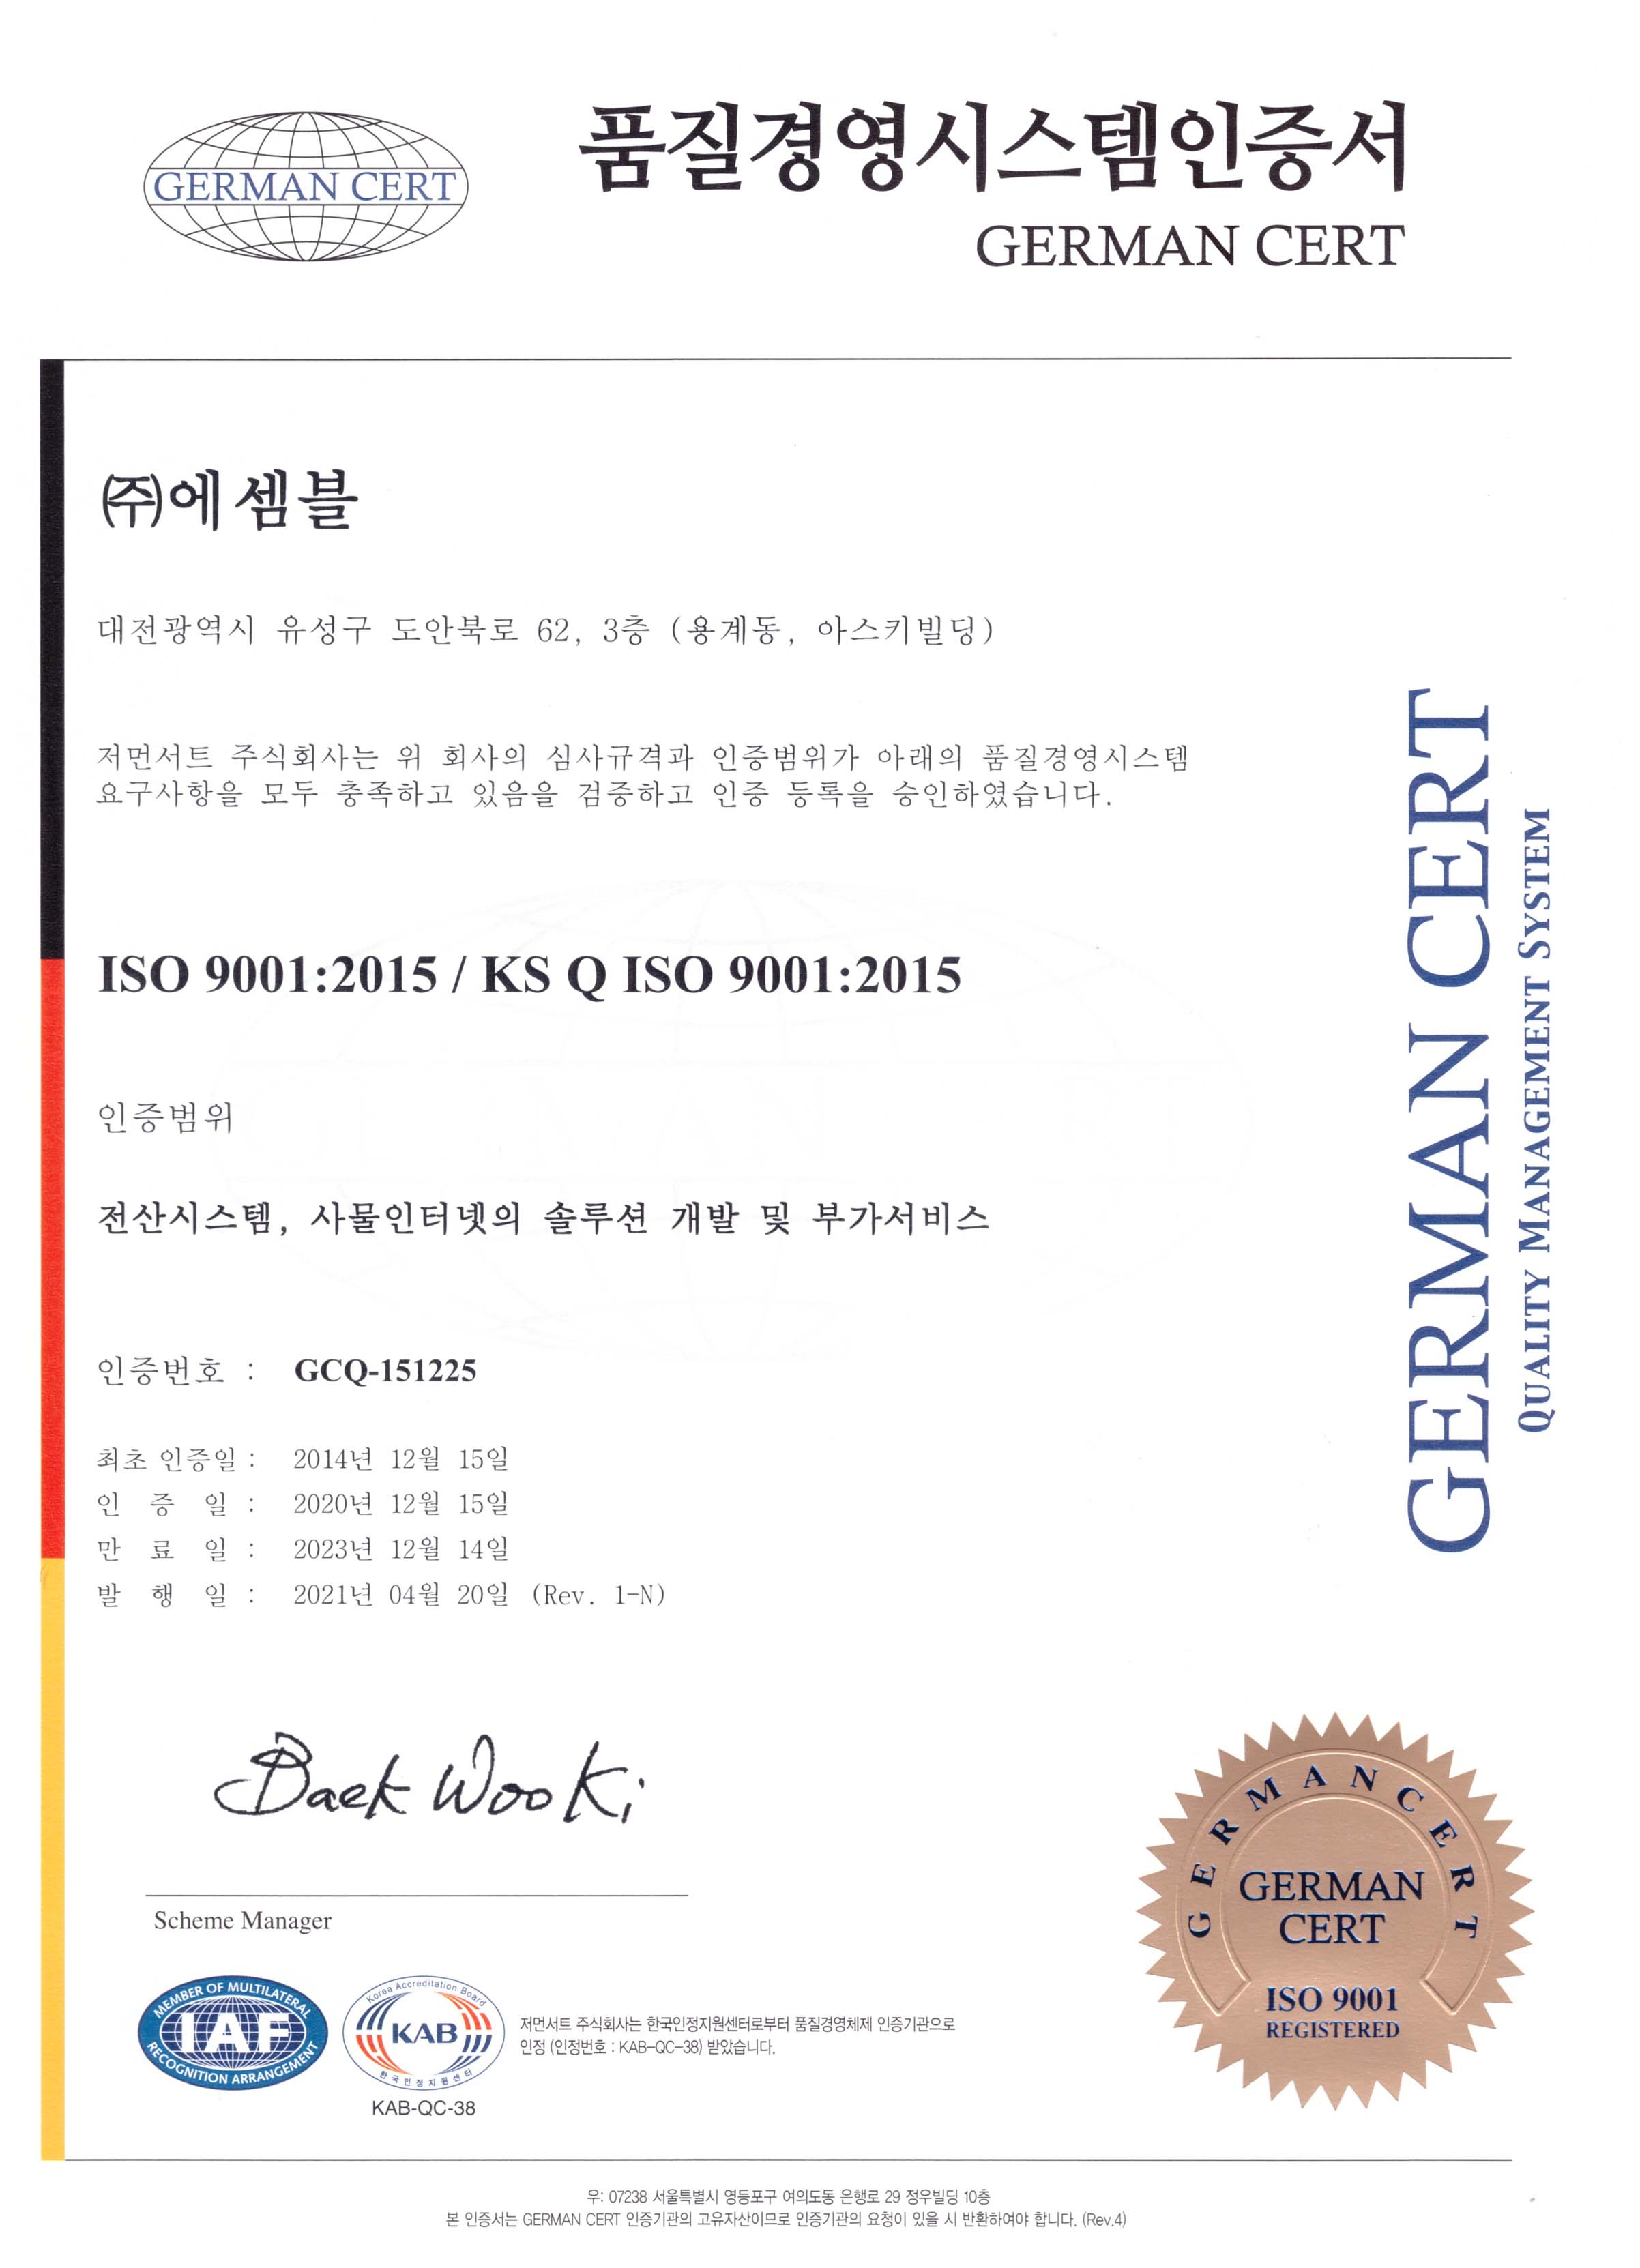 Quality Management System Certificate.